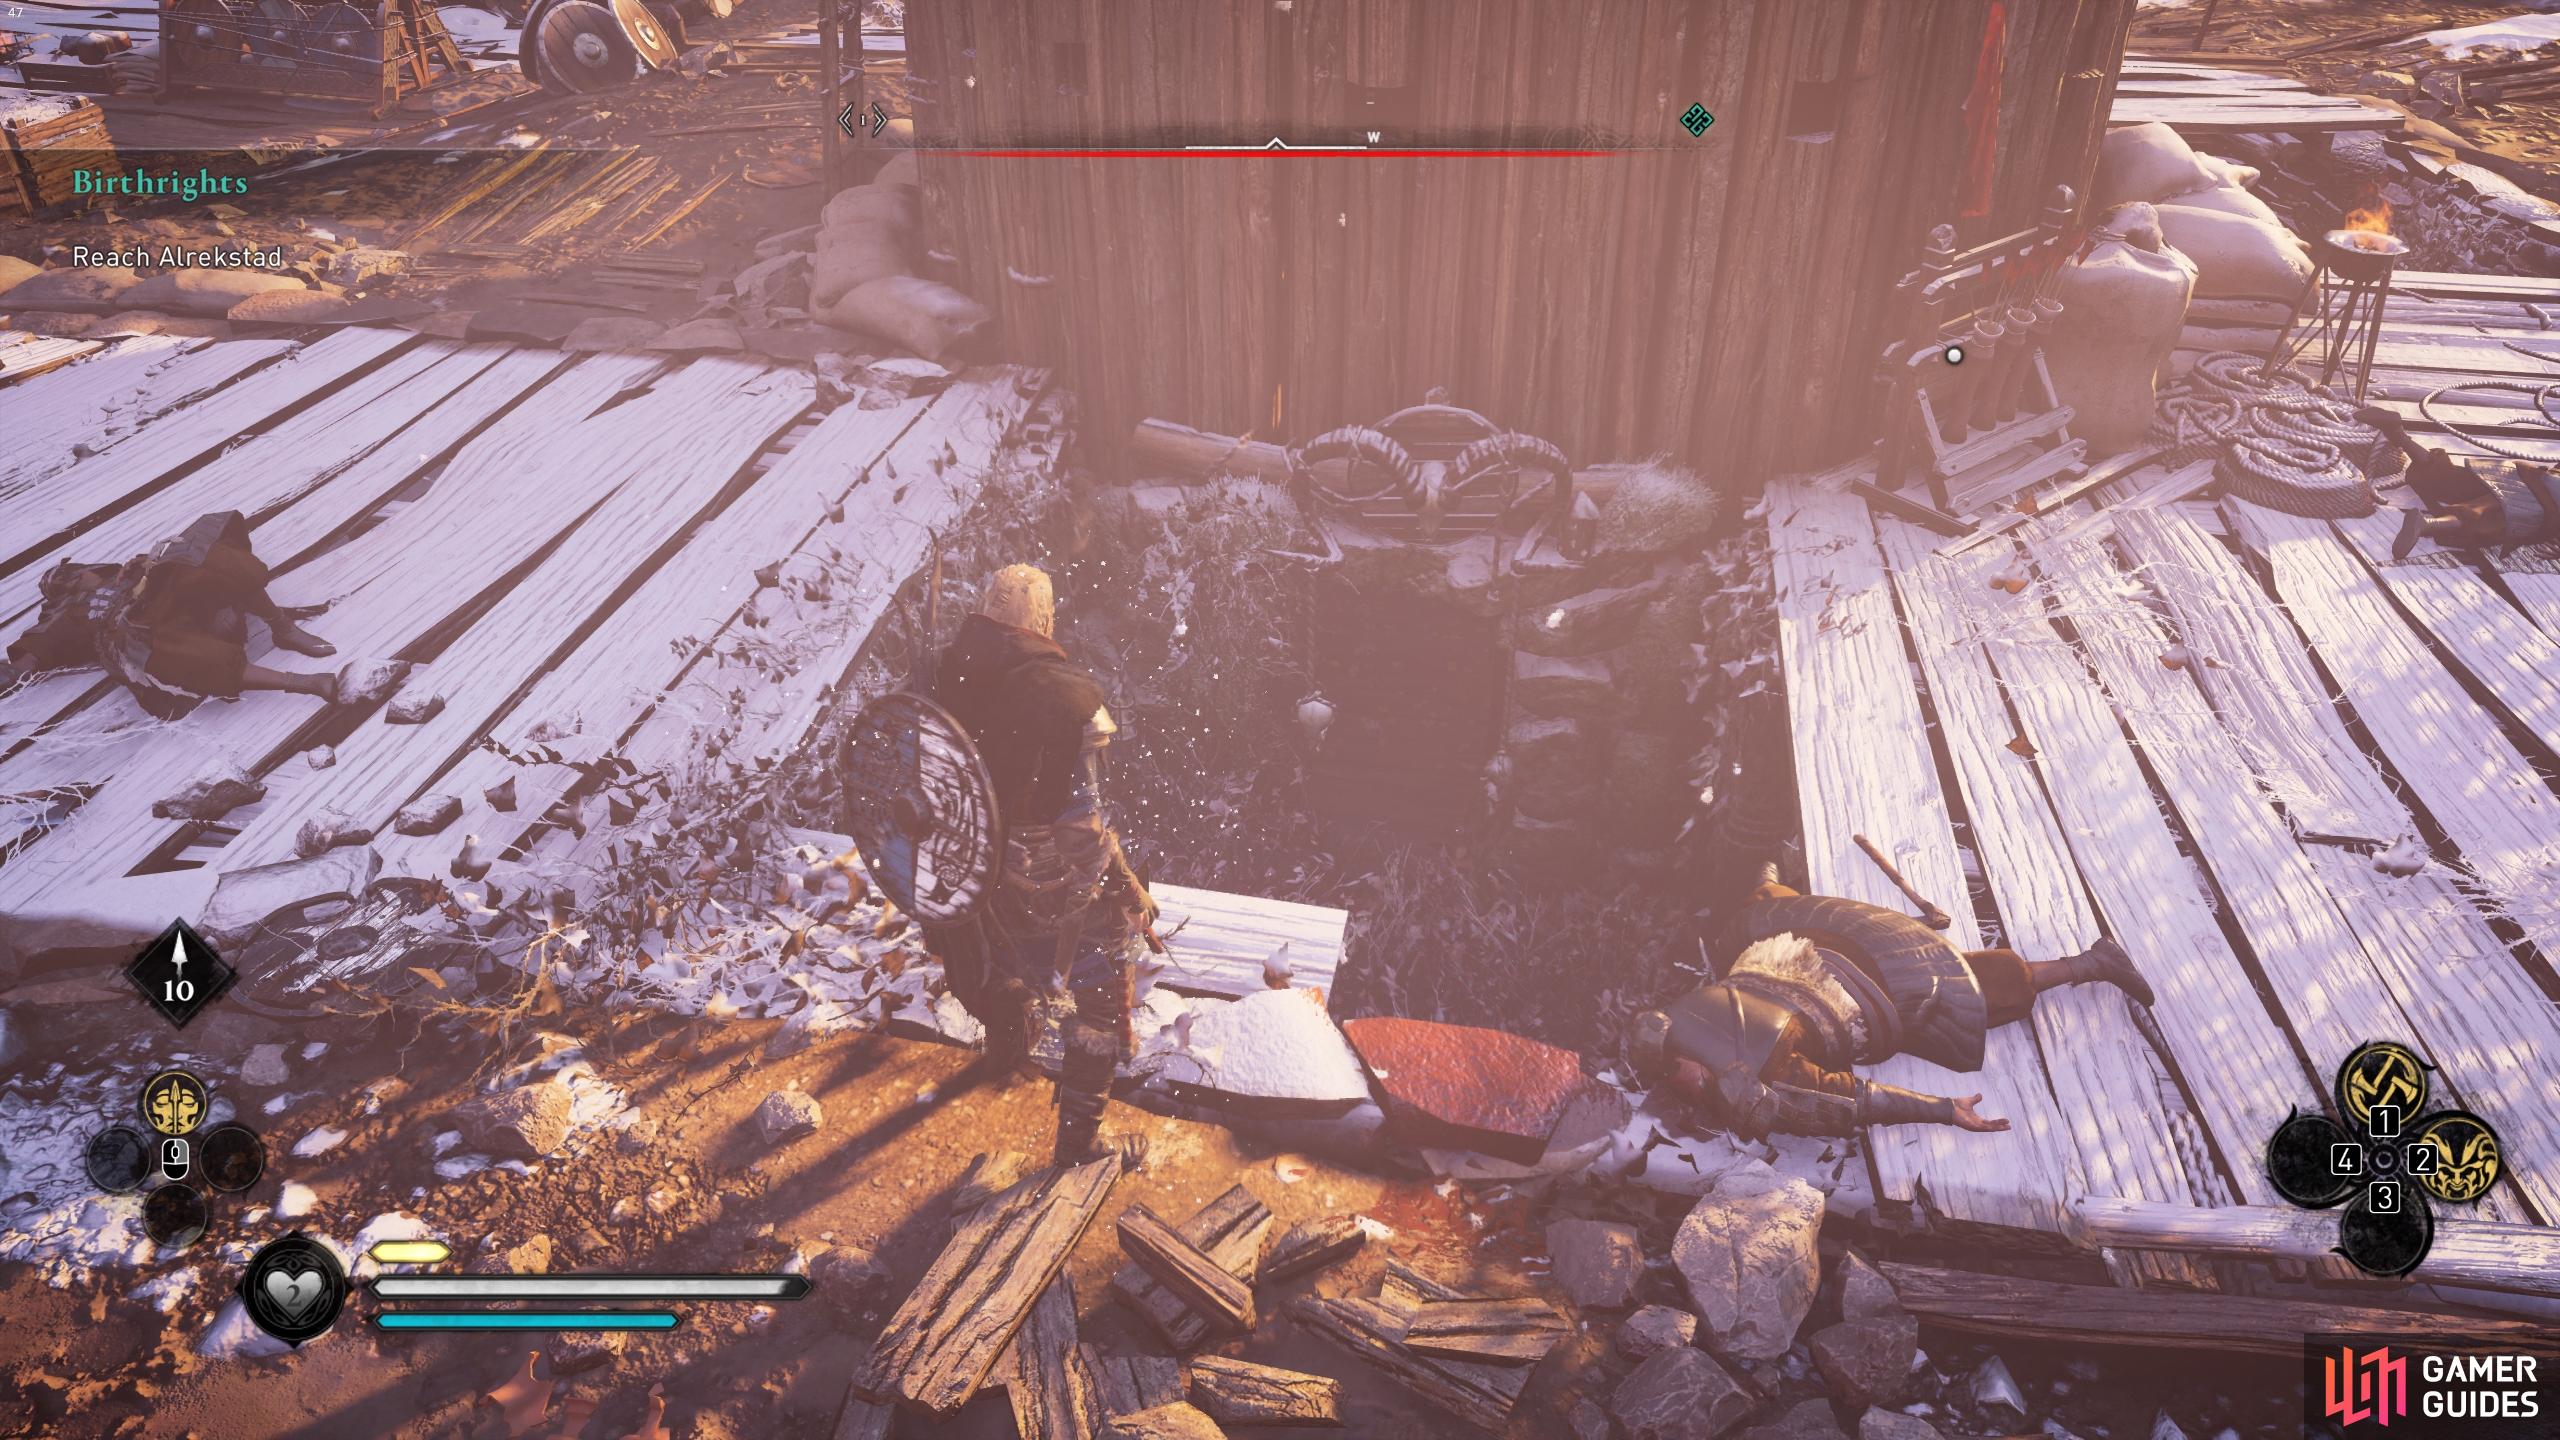 Or you can shoot the wooden platform just outside the tower.